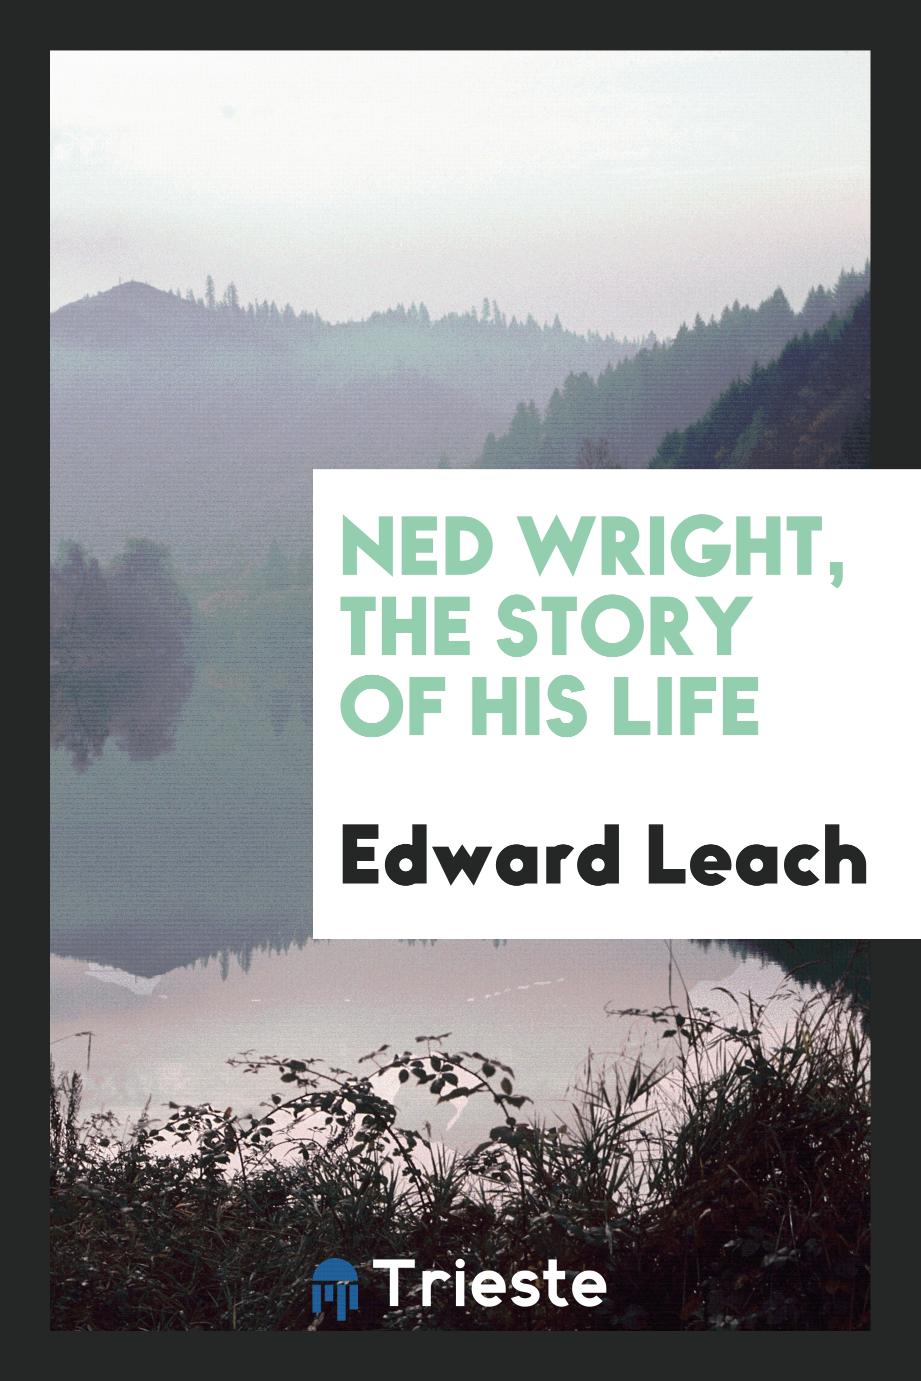 Ned Wright, the Story of His Life